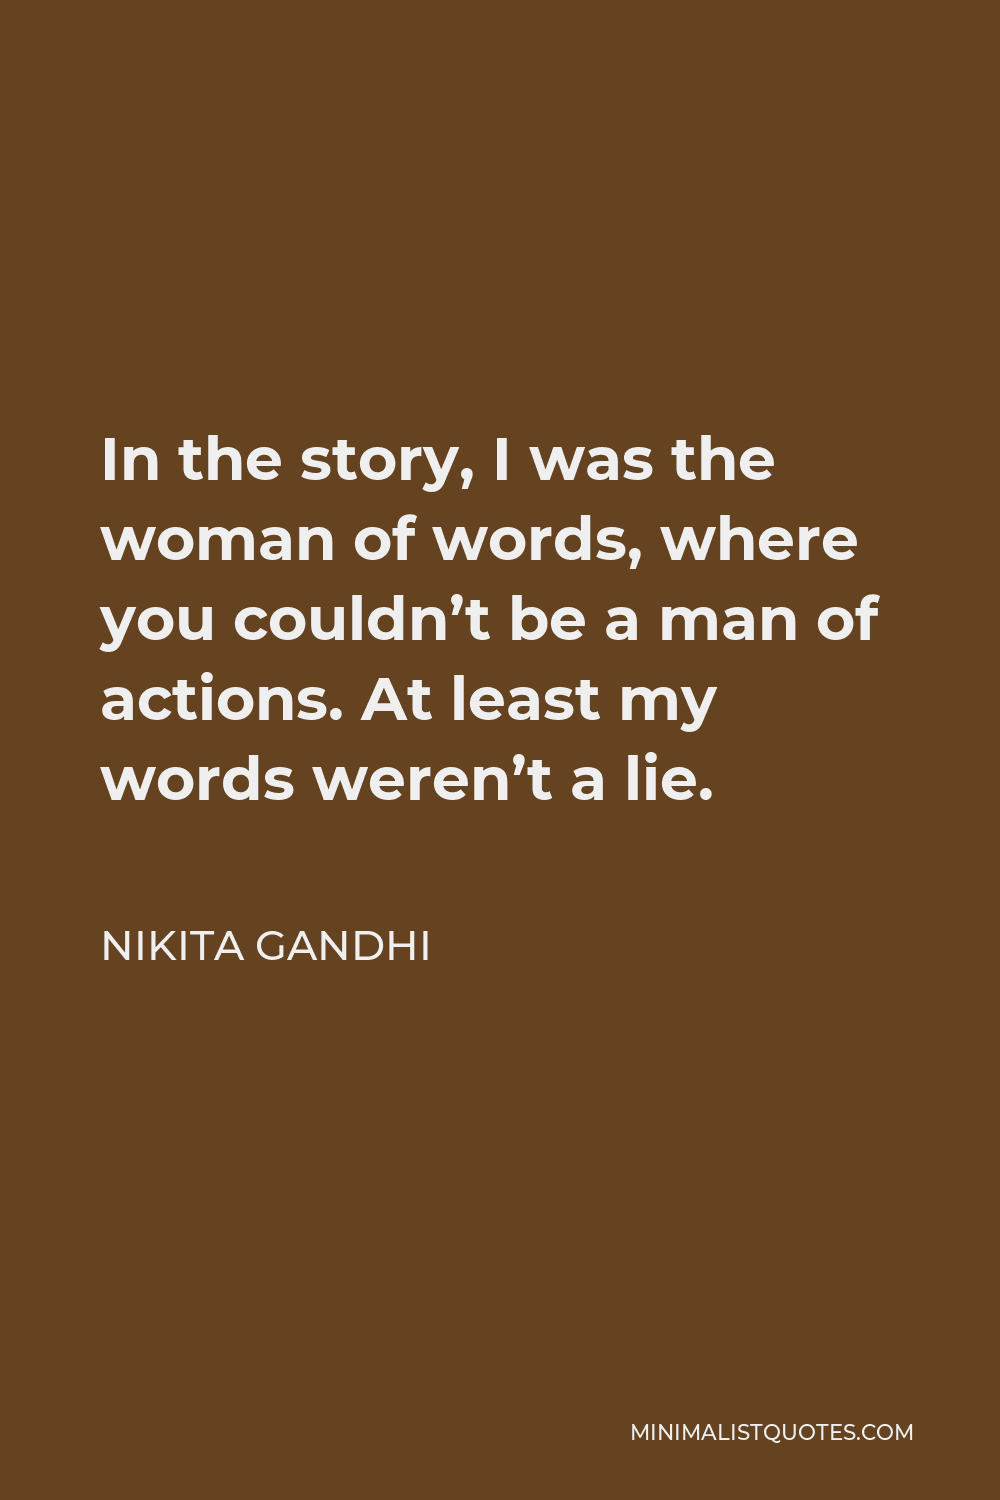 Nikita Gandhi Quote - In the story, I was the woman of words, where you couldn’t be a man of actions. At least my words weren’t a lie.